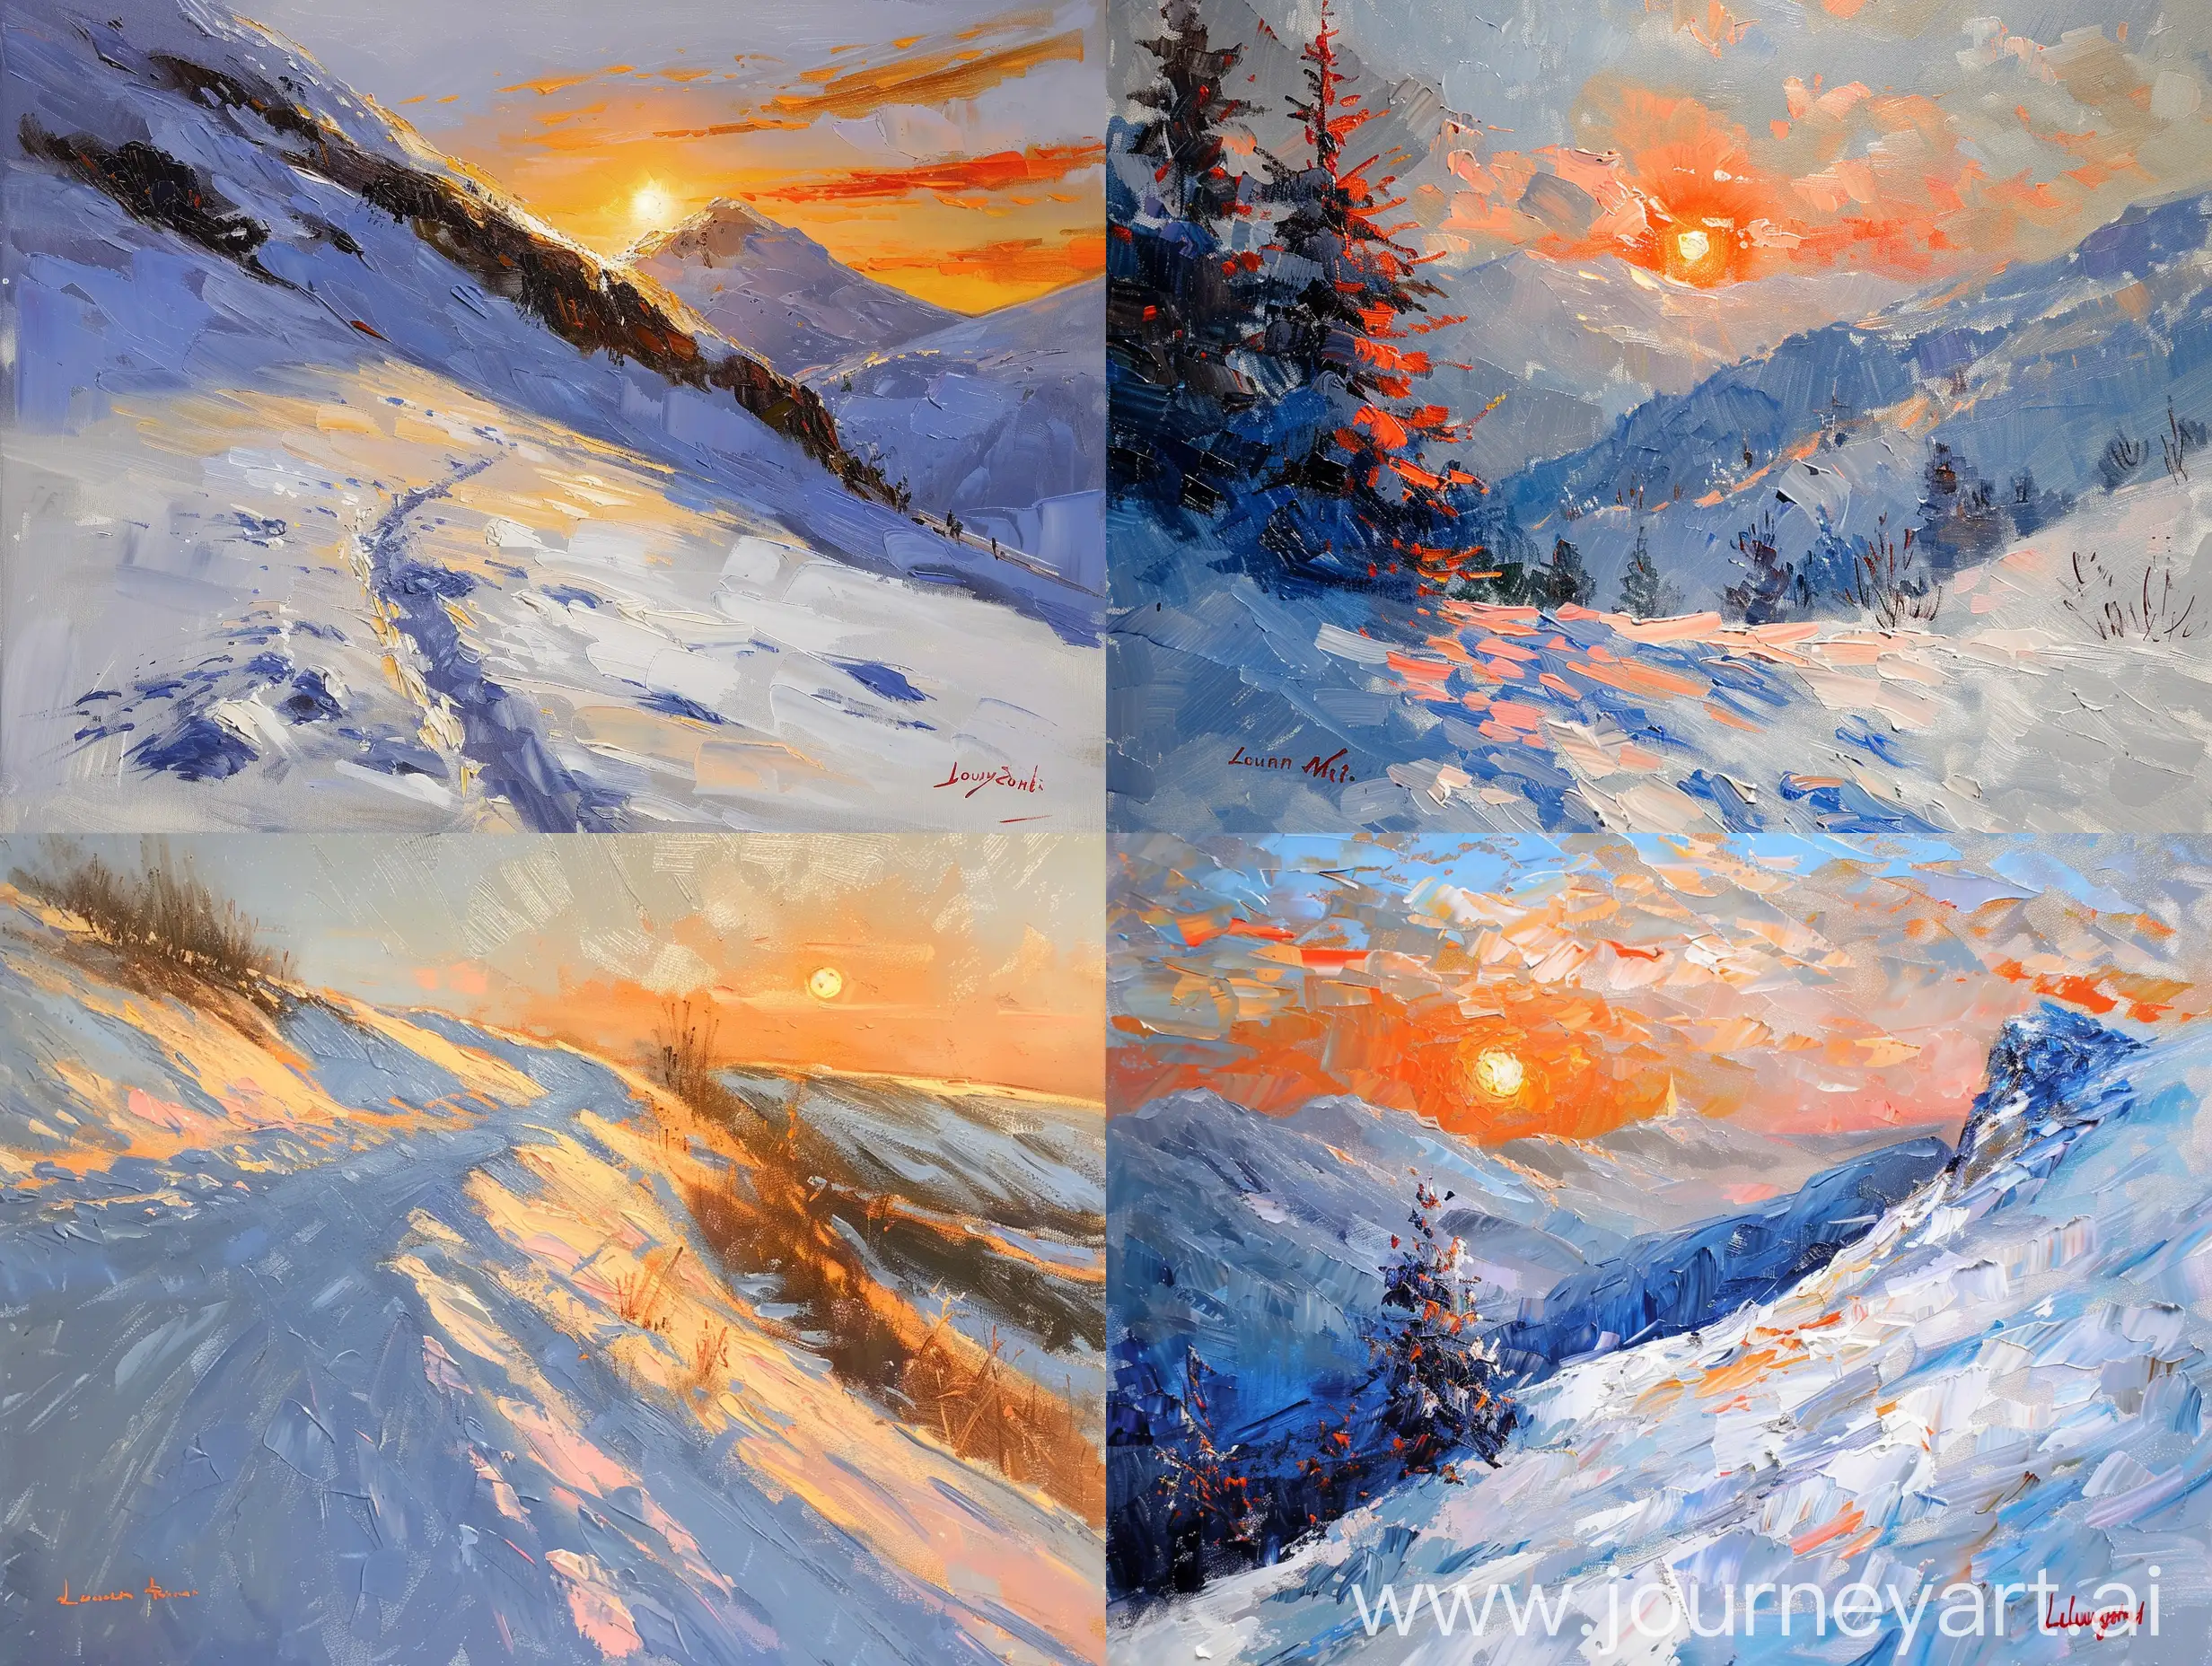 Painting in the style of Louis Aston Knight, The sun rises over a snowy mountain, orange sunlight hits the snowy mountain, orange white blue palettes